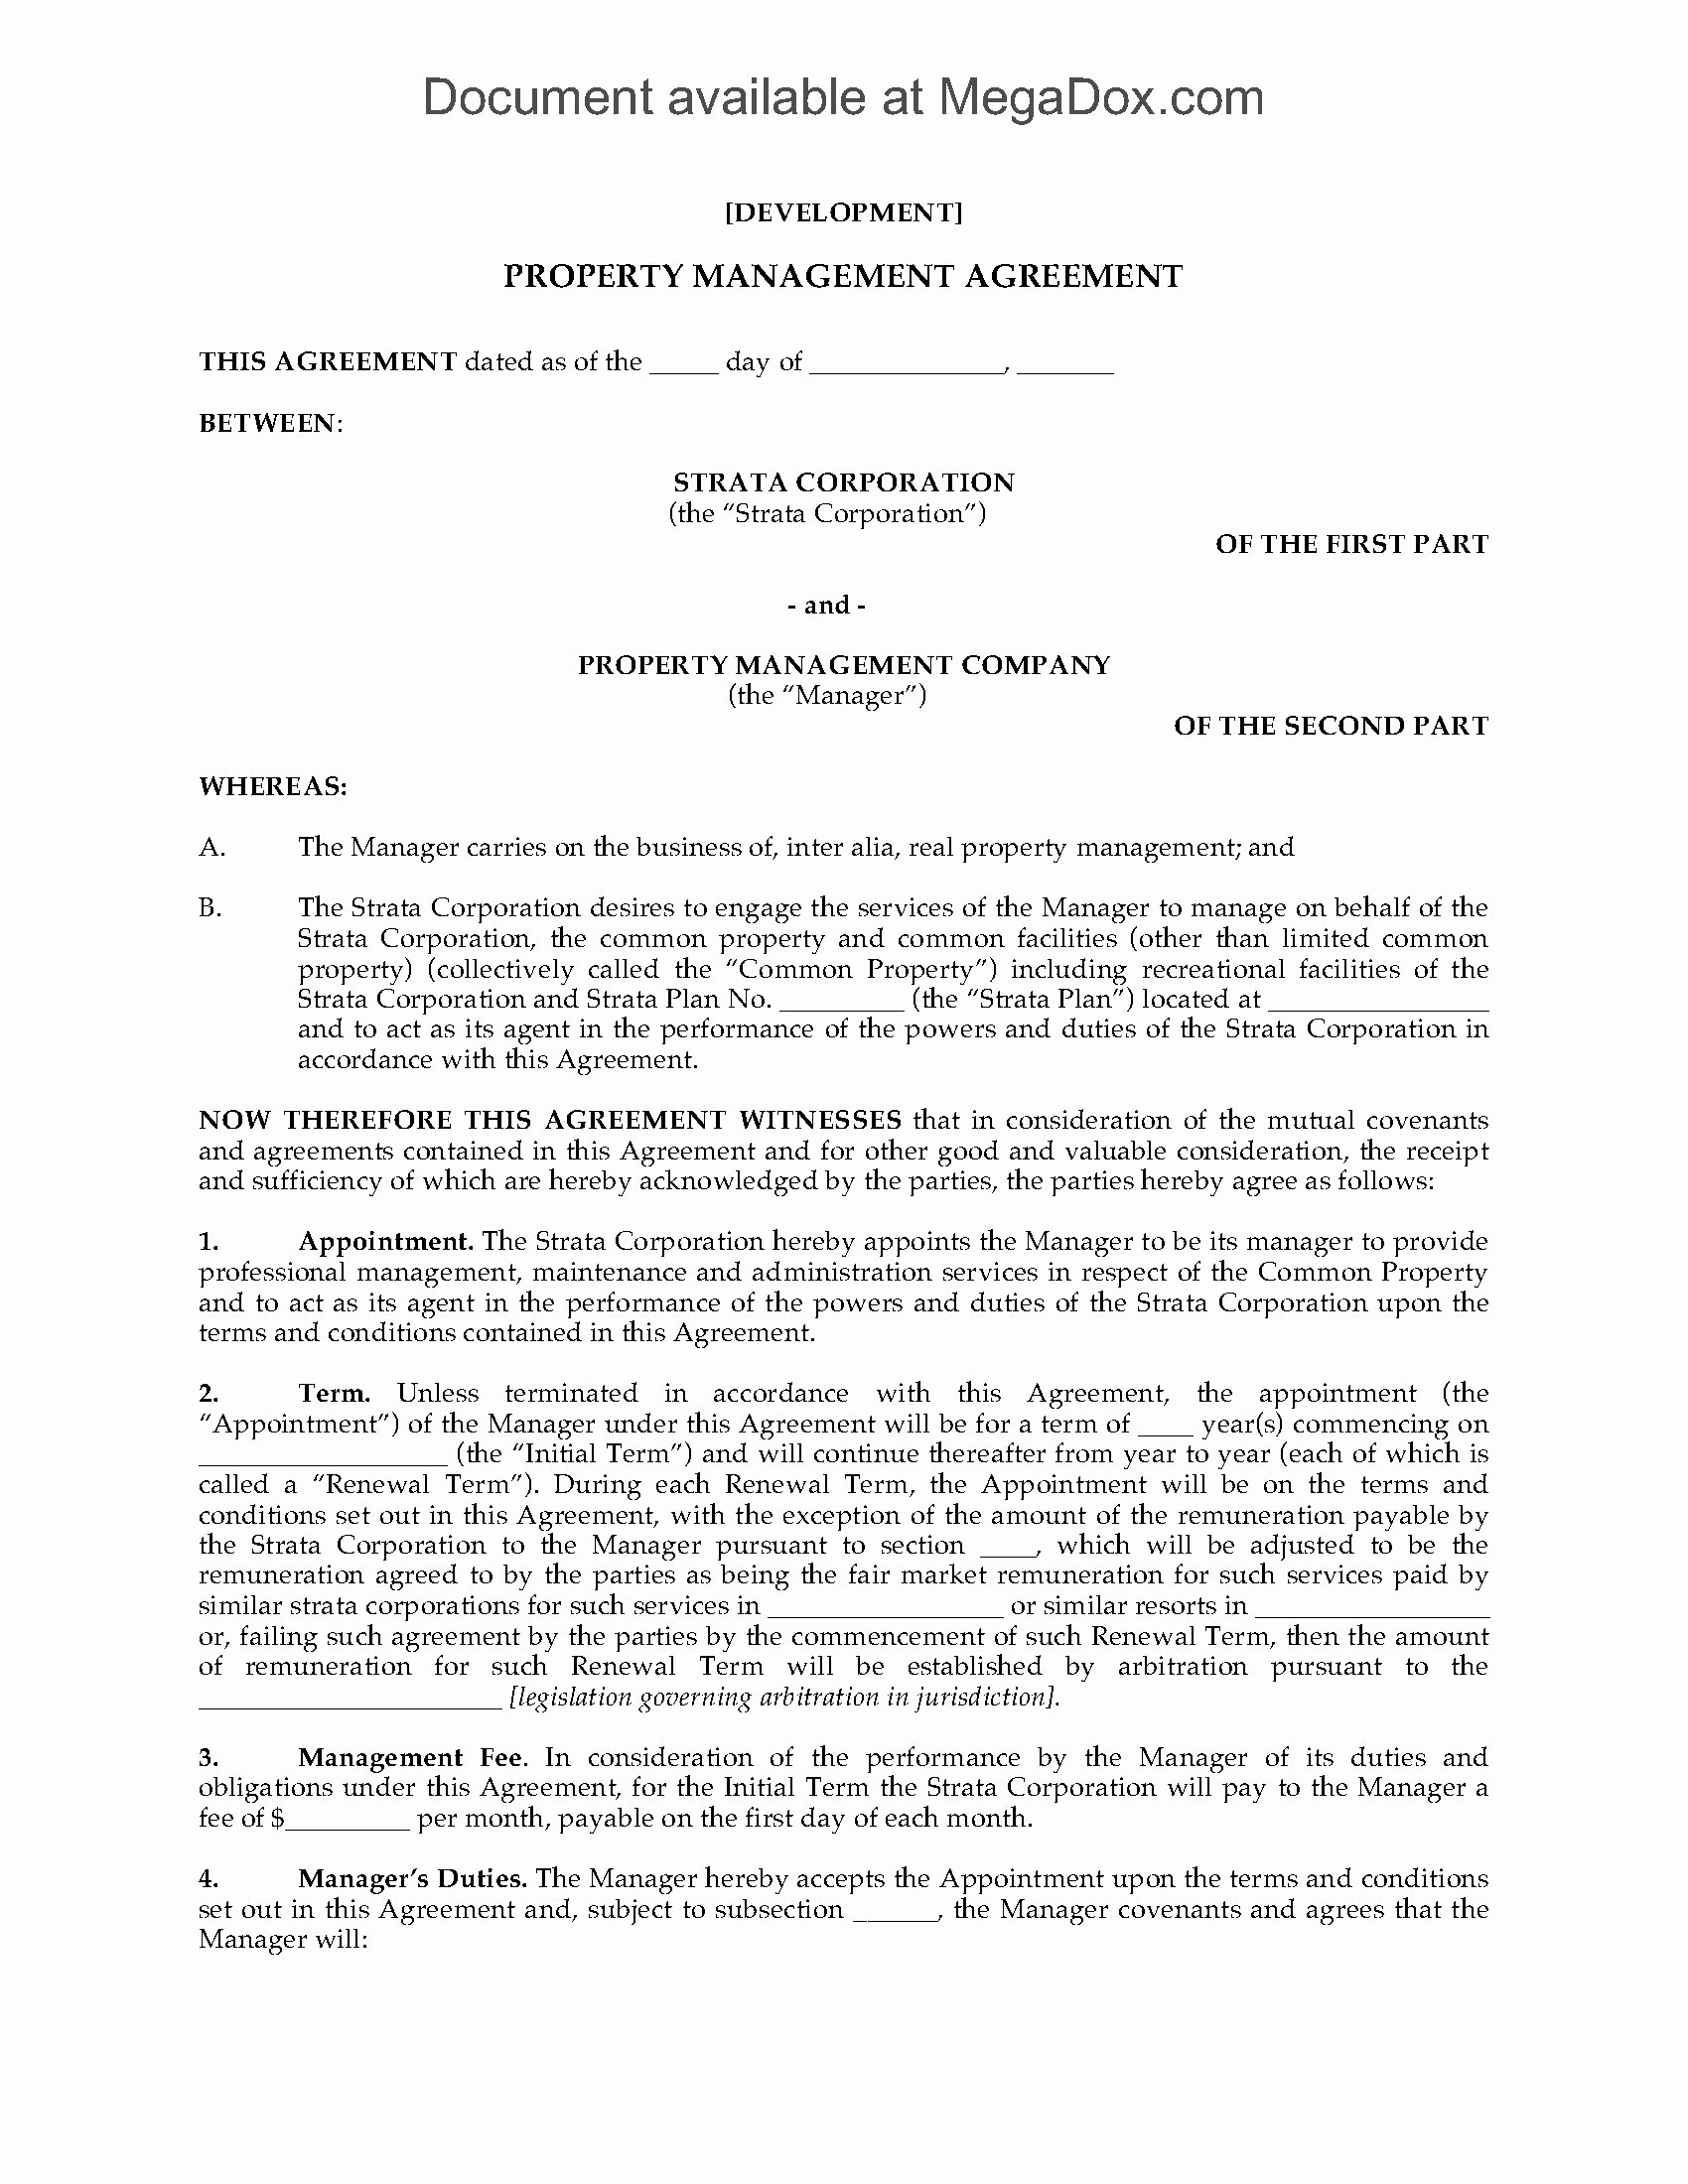 Property Management Agreement Template Luxury Property Management Agreement for Strata Rental Pool